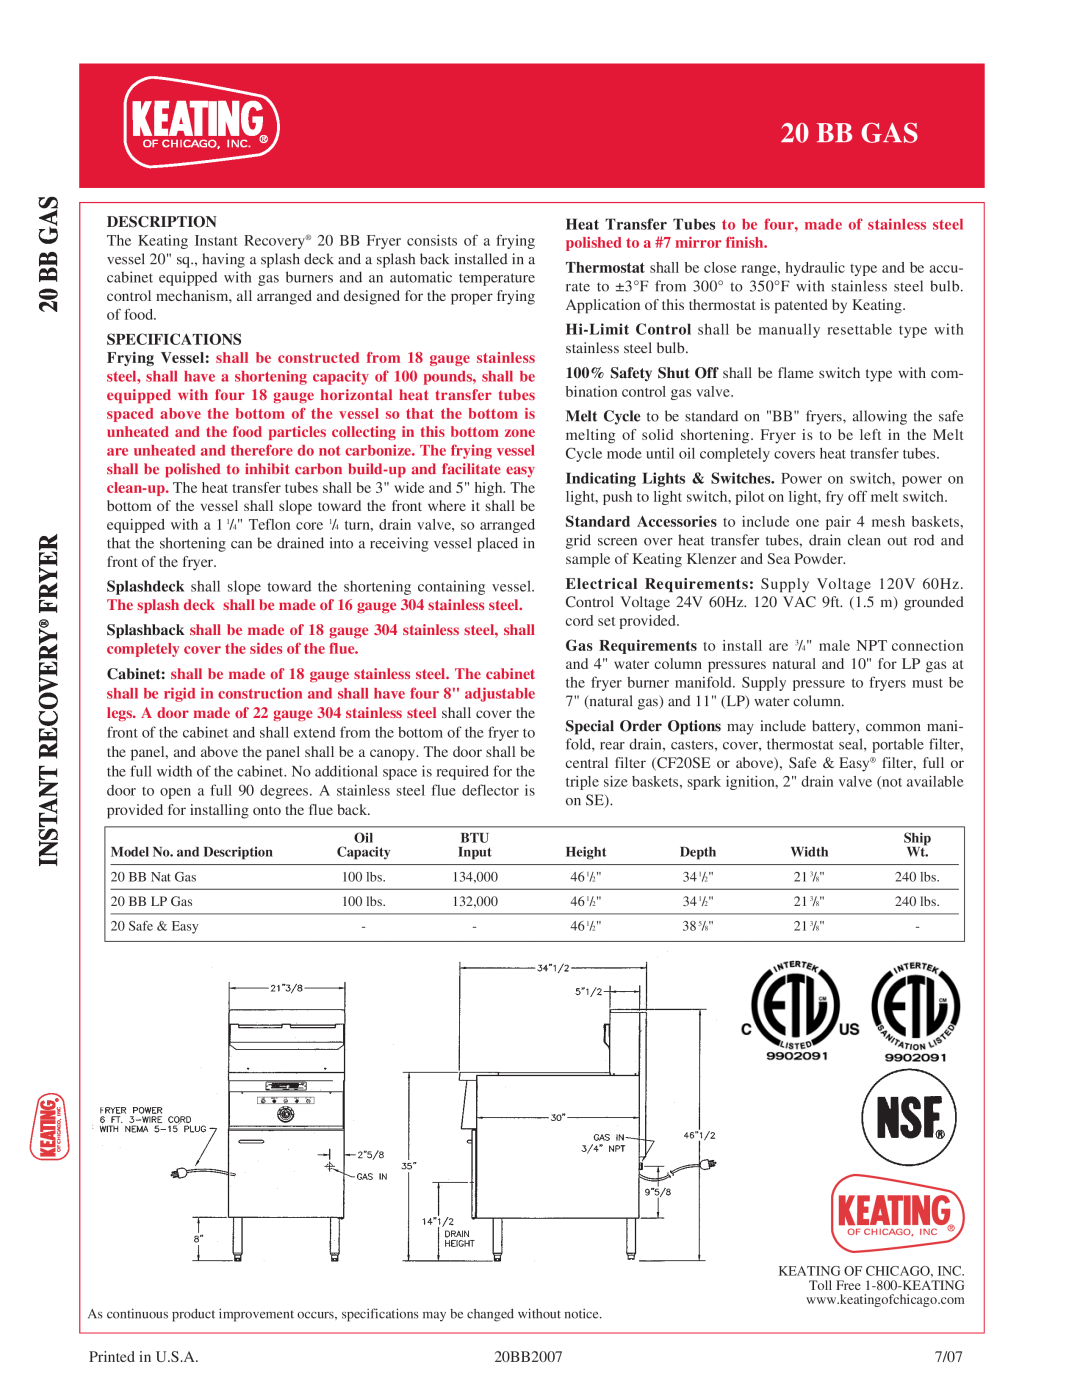 Keating Of Chicago 20 BB Gas manual Bb Gas Instant Recovery Fryer, Description, Specifications 